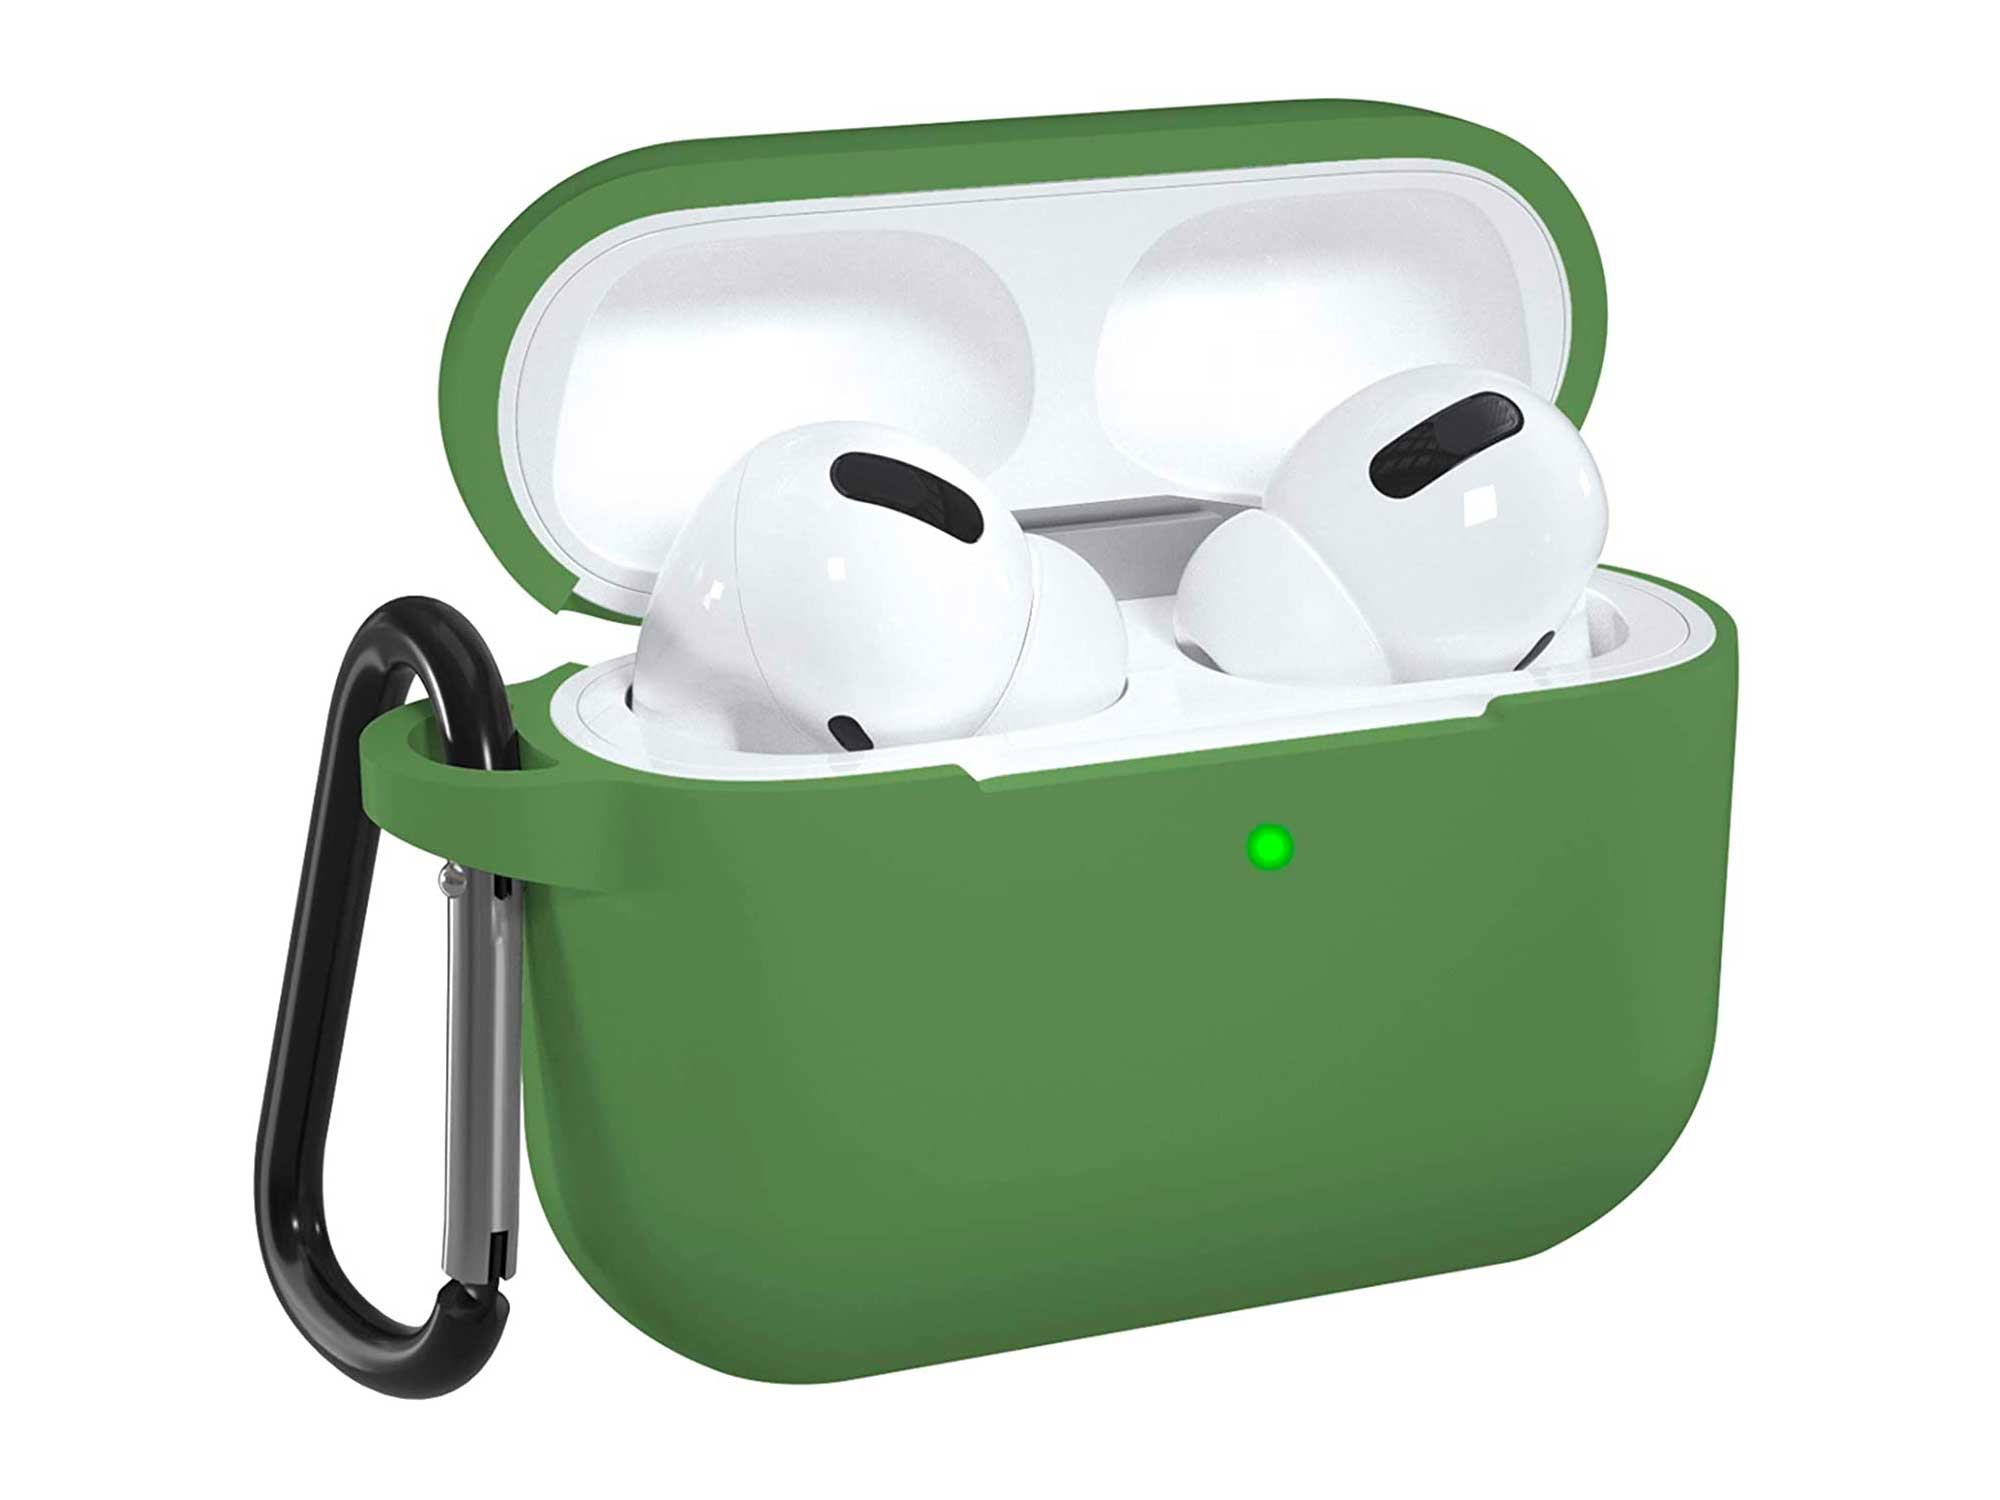 DGege Silicone Case Cover Compatible with Apple AirPods Pro, Protective Case with Carabiner for Airpods 3 (Front LED Visible), Olive Green